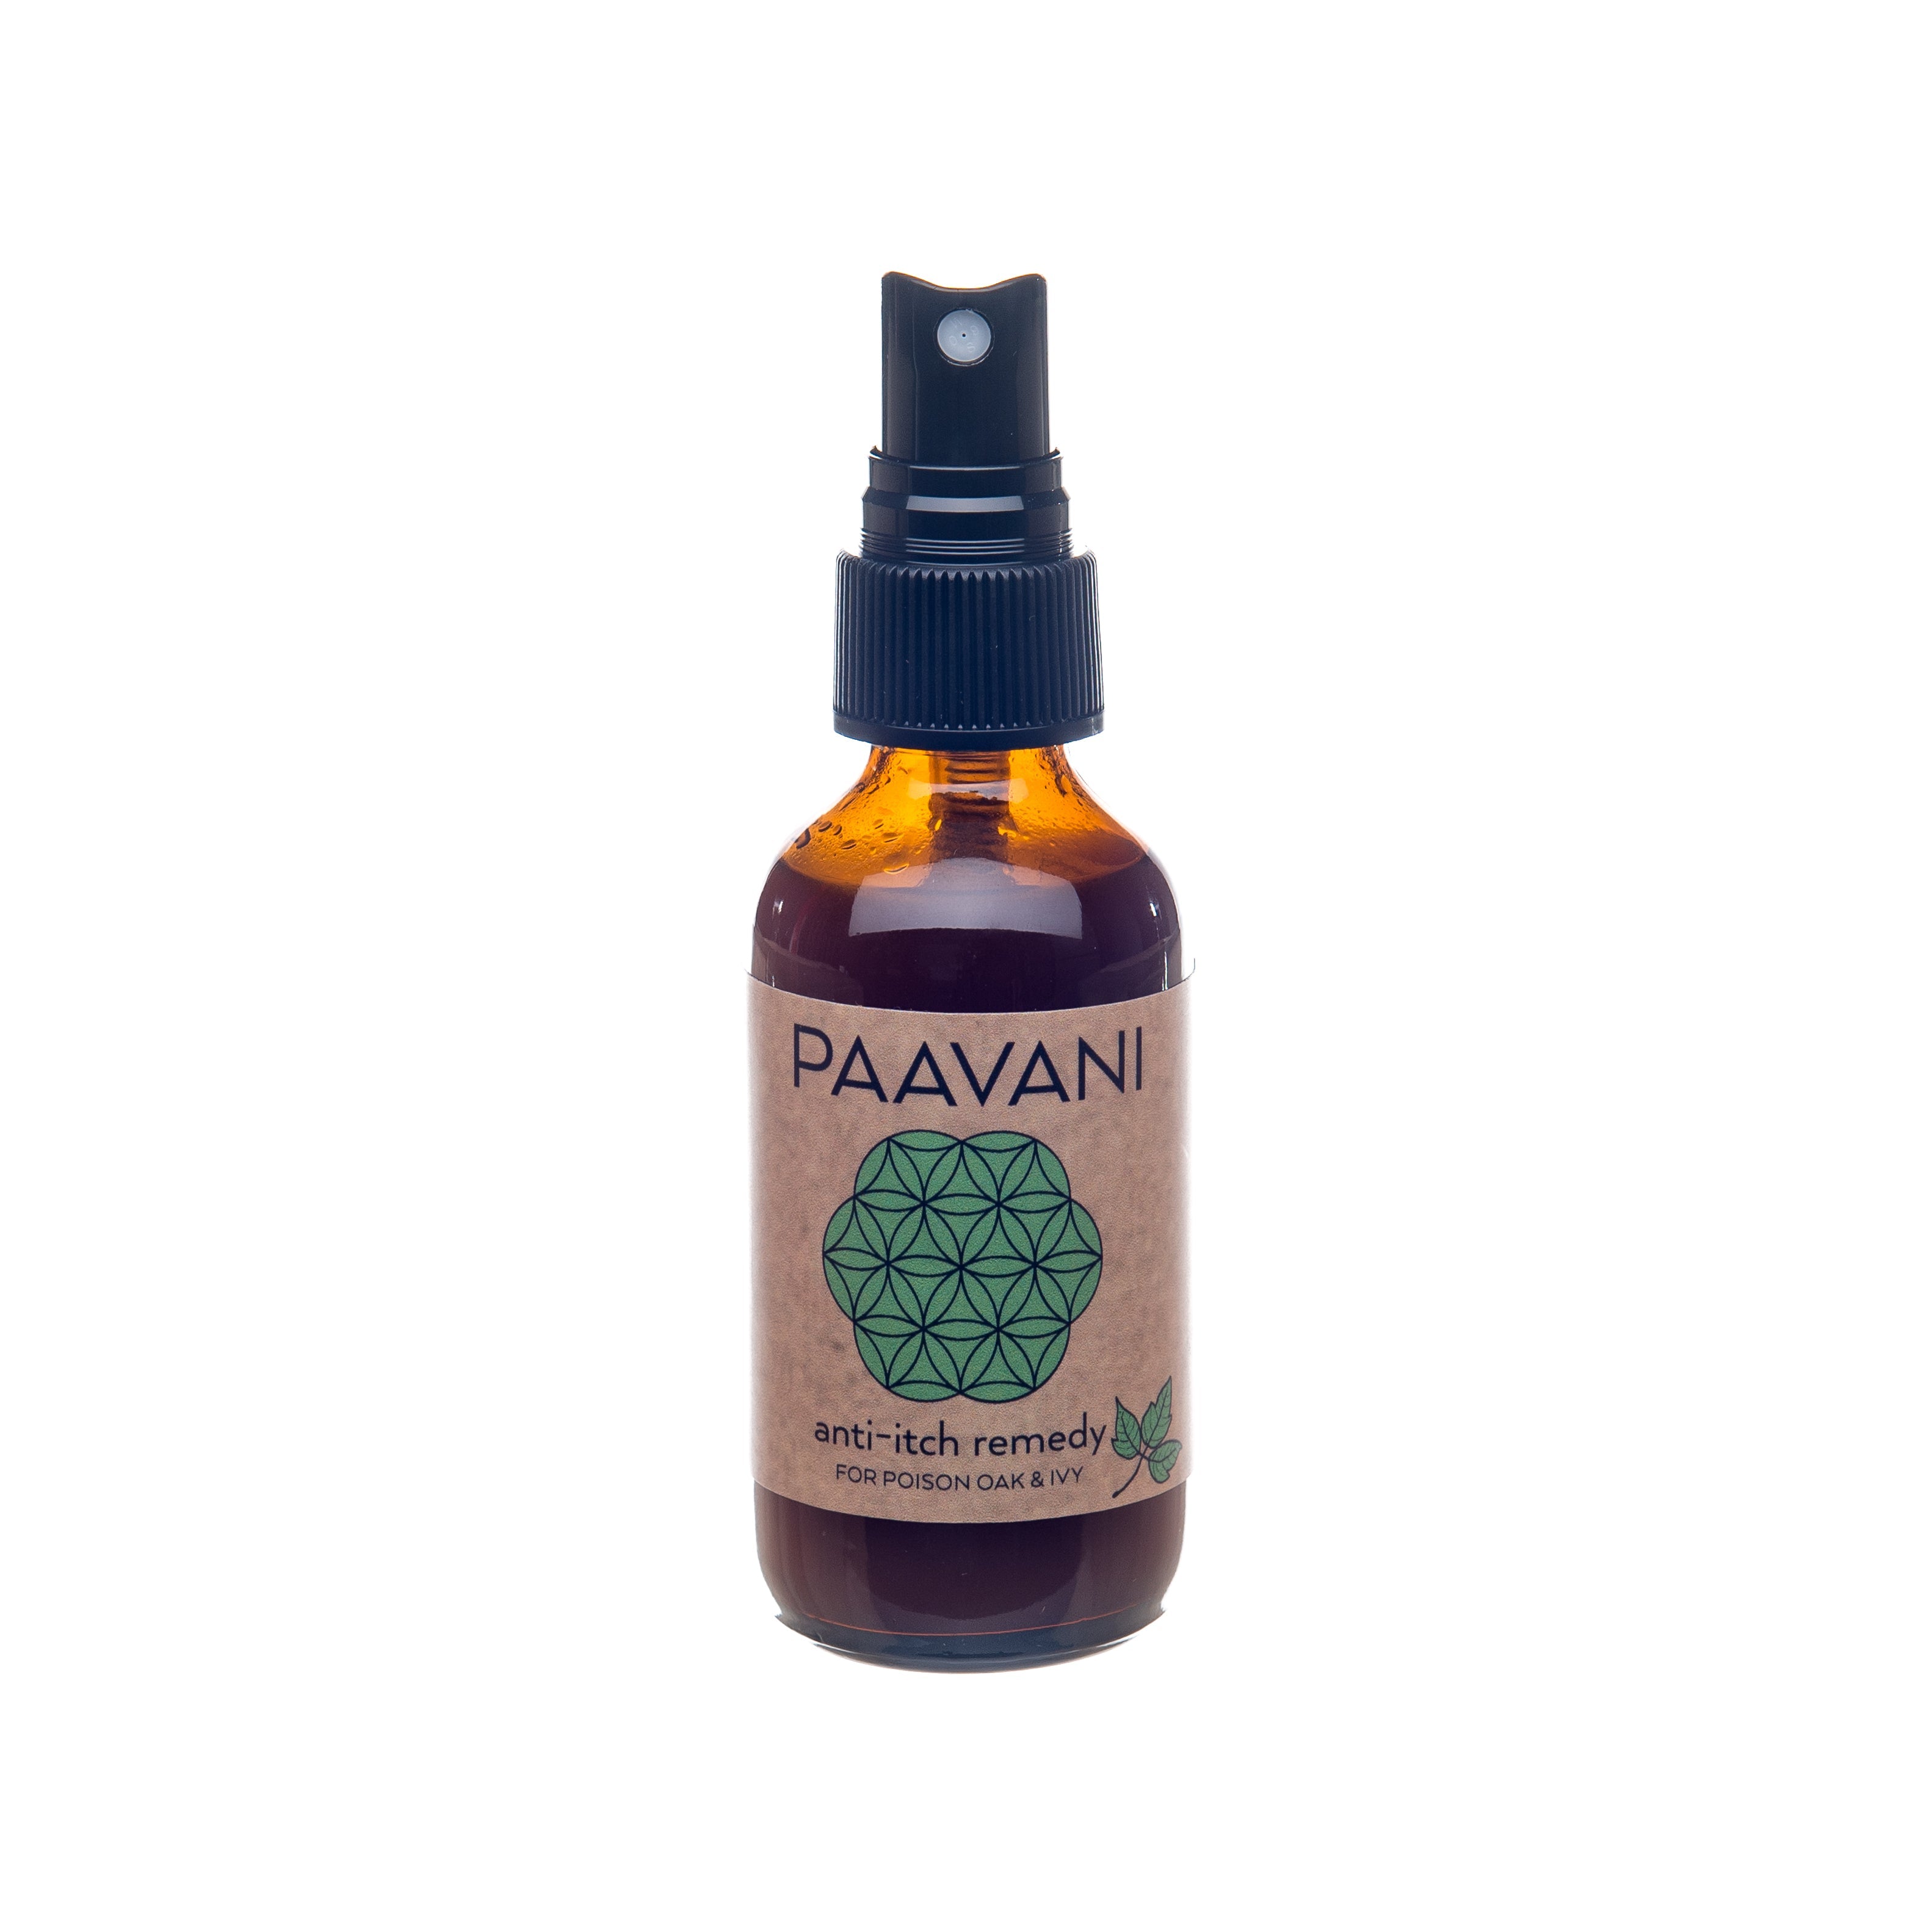 Find Natural Relief: Soothing Anti-Itch Remedy for Poison Oak, Ivy & Bug Bites (2oz)